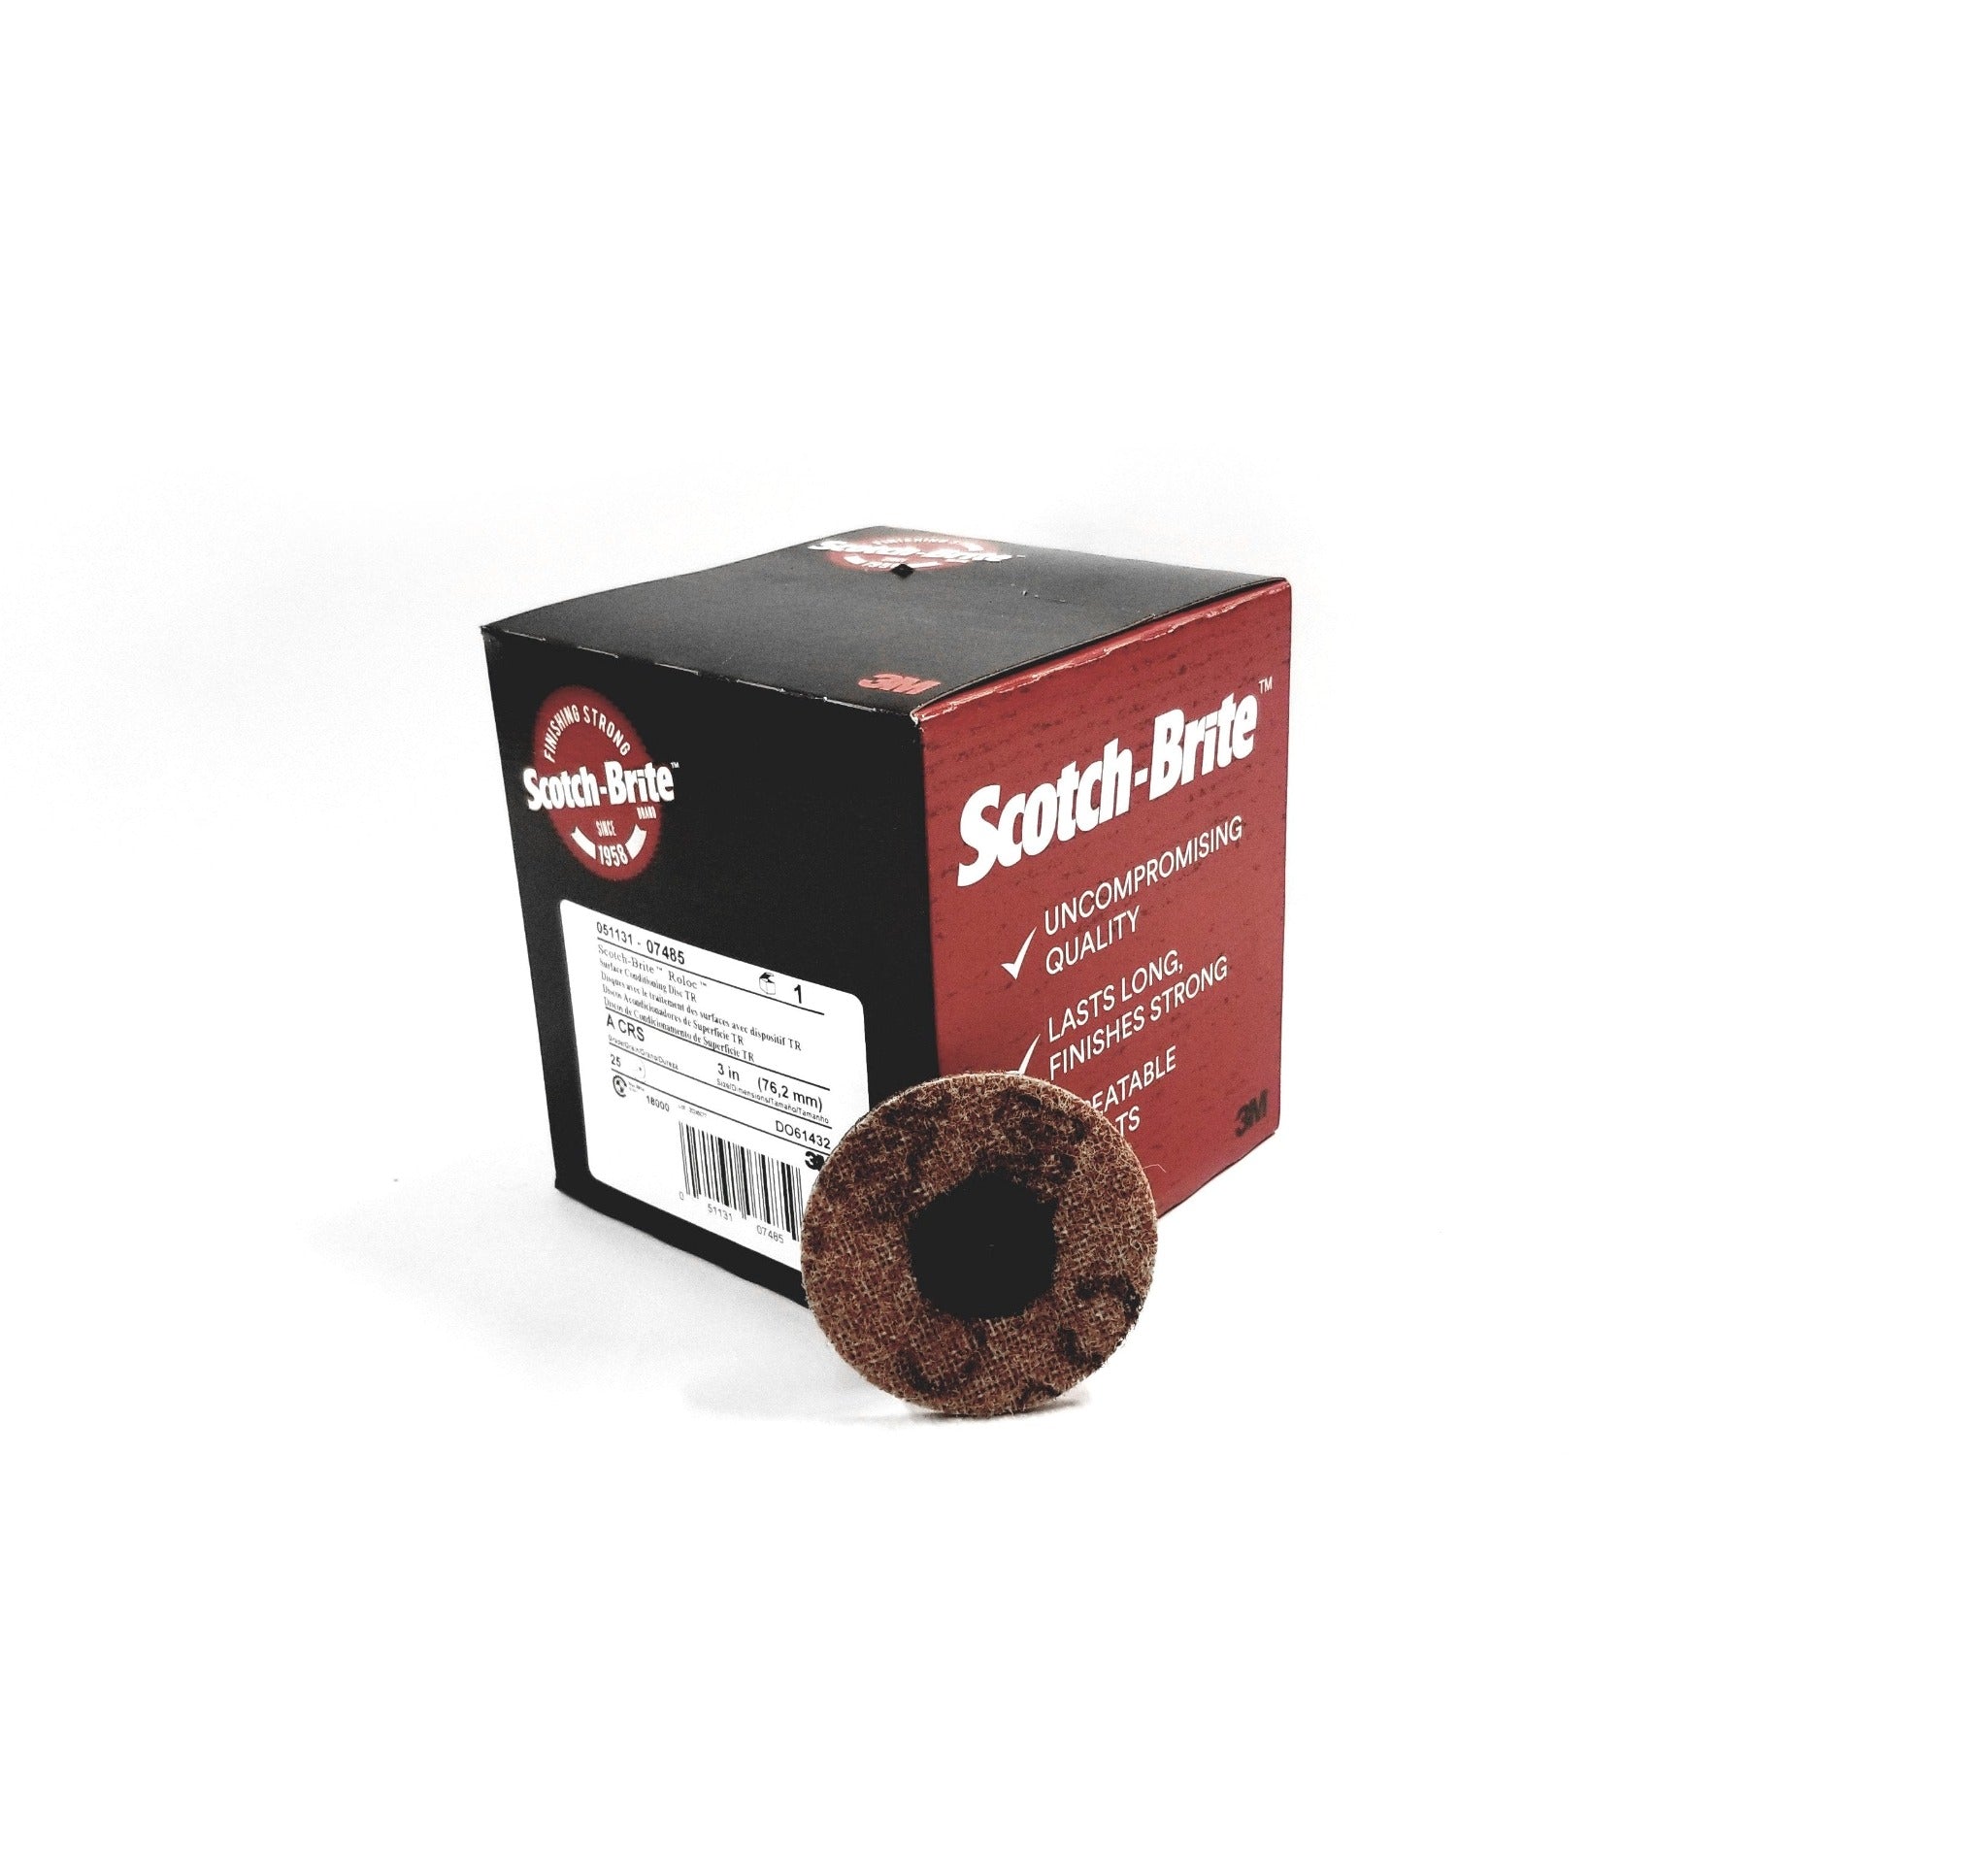 Scotch-Brite Roloc Surface Conditioning Disc, Maroon, Medium, TR, 2 in, 25 per box. 4 Boxes, 100 Total.